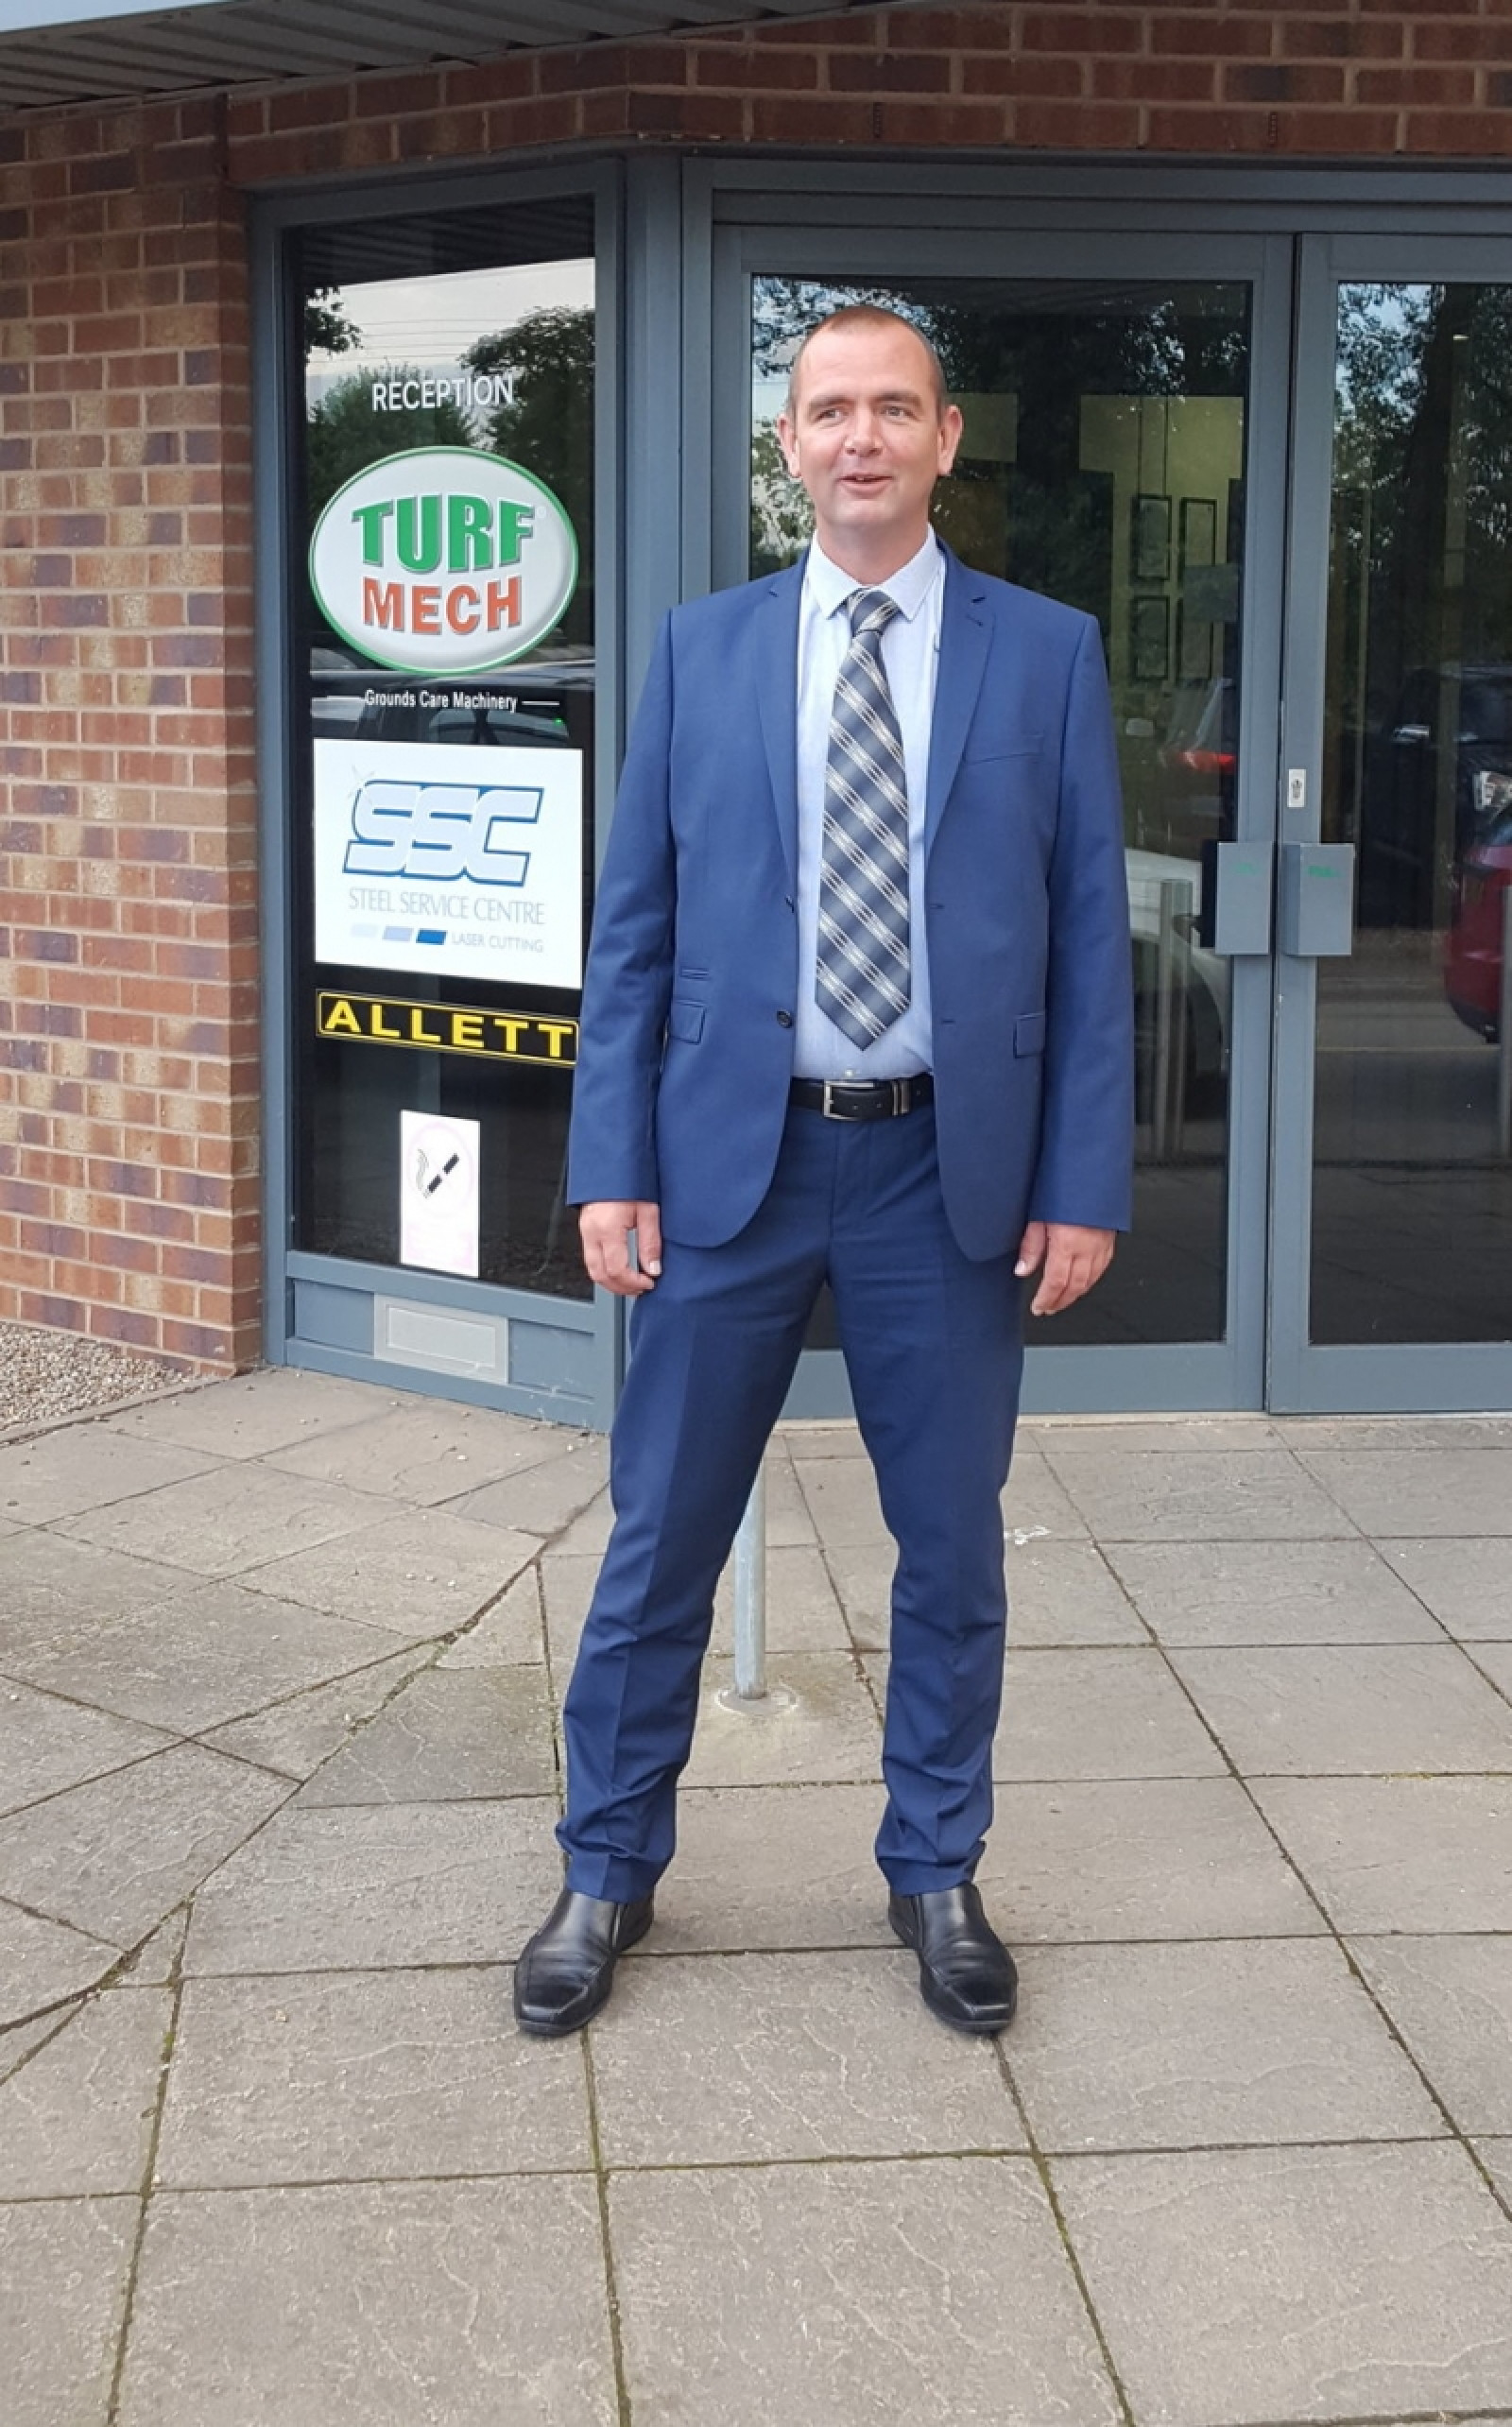 SSC LASER APPOINTS REGIONAL BUSINESS DEVELOPMENT MANAGER IN THE NORTH EAST